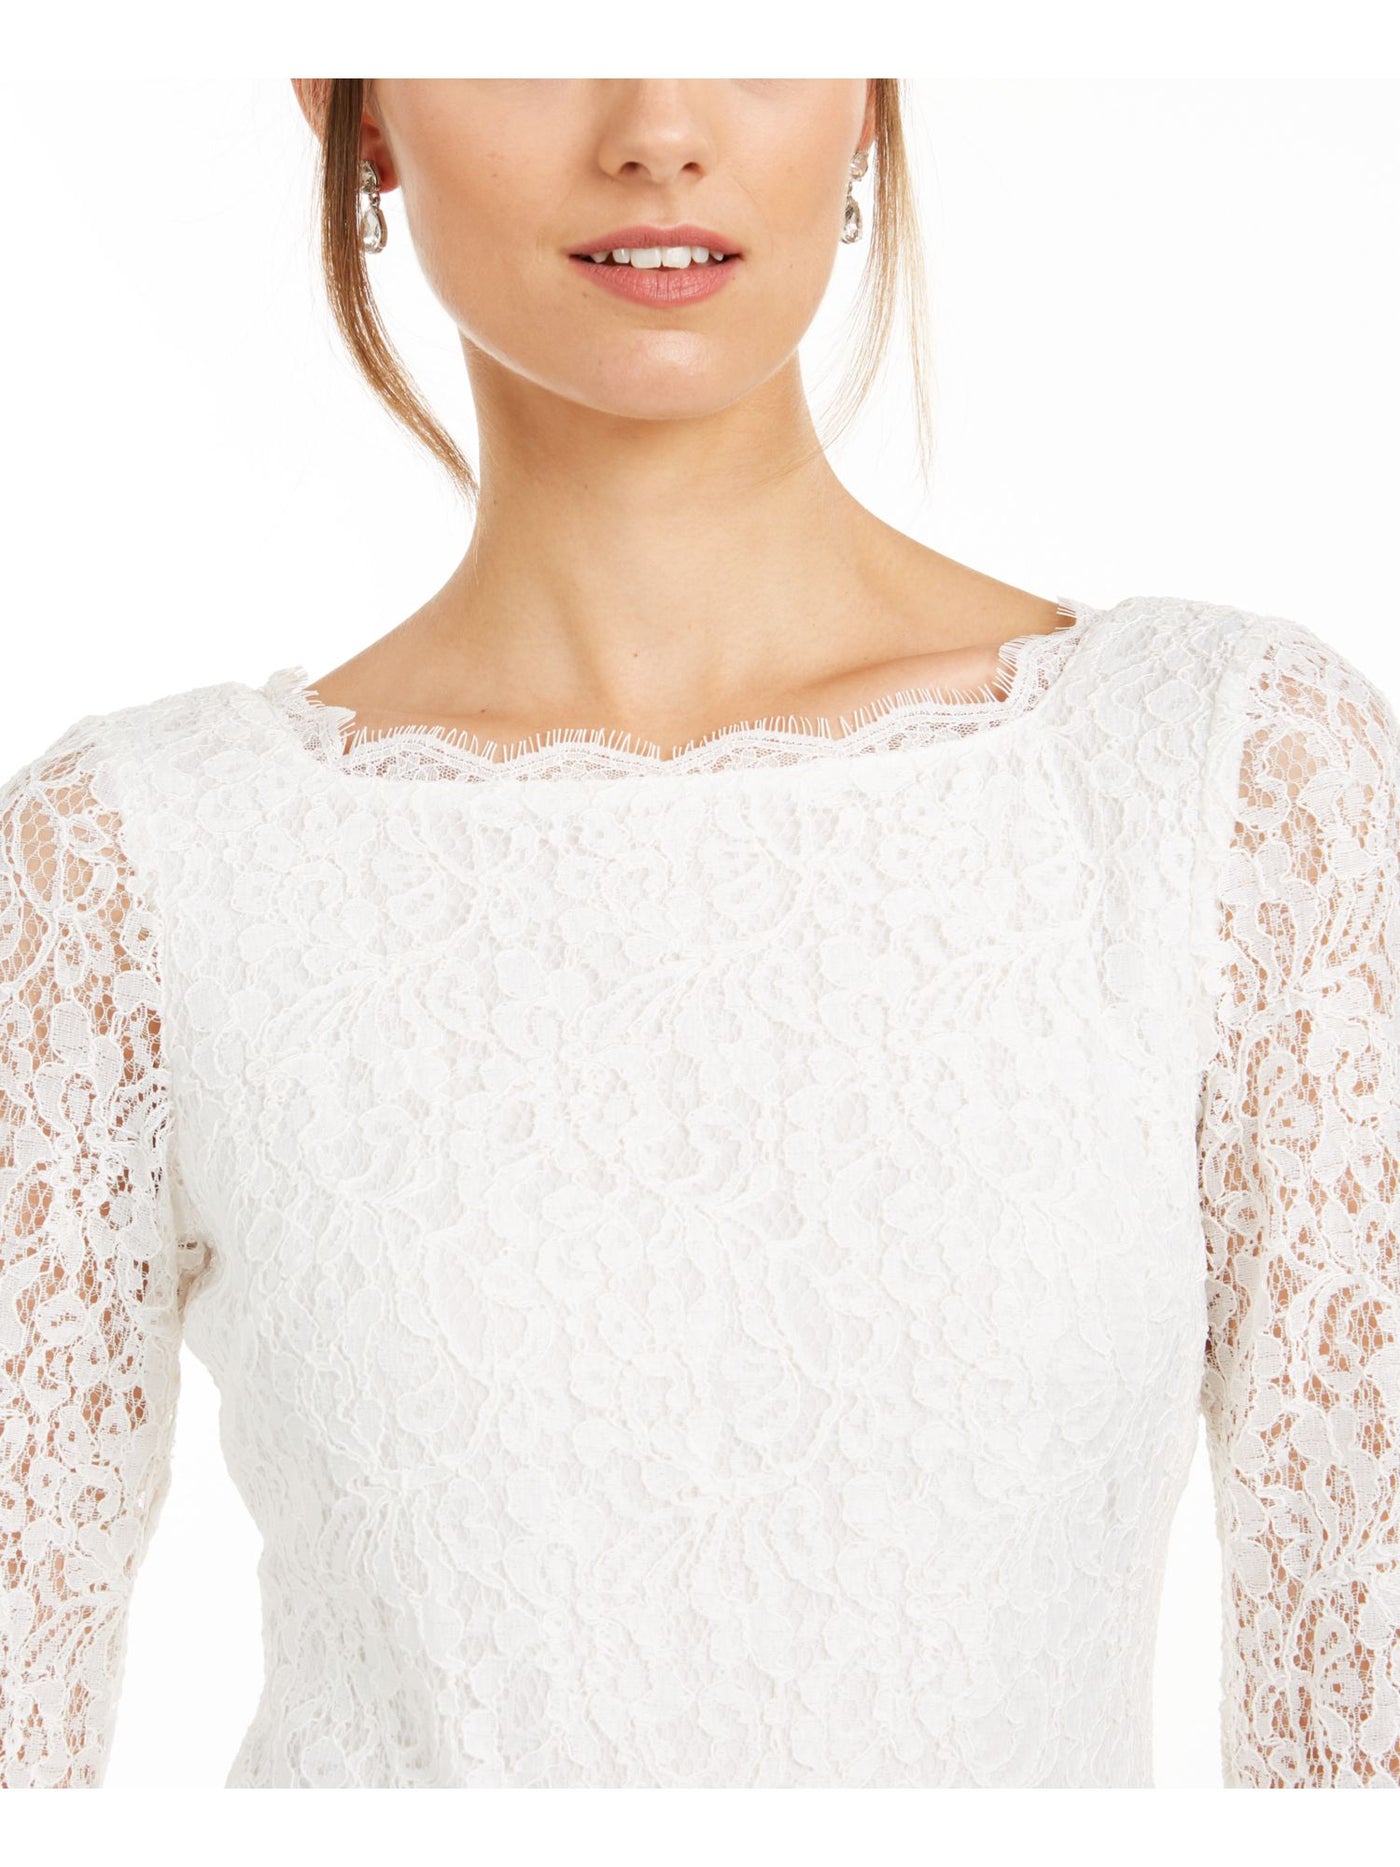 ADRIANNA PAPELL Womens White Lace Long Sleeve Square Neck Above The Knee Sheath Dress 2